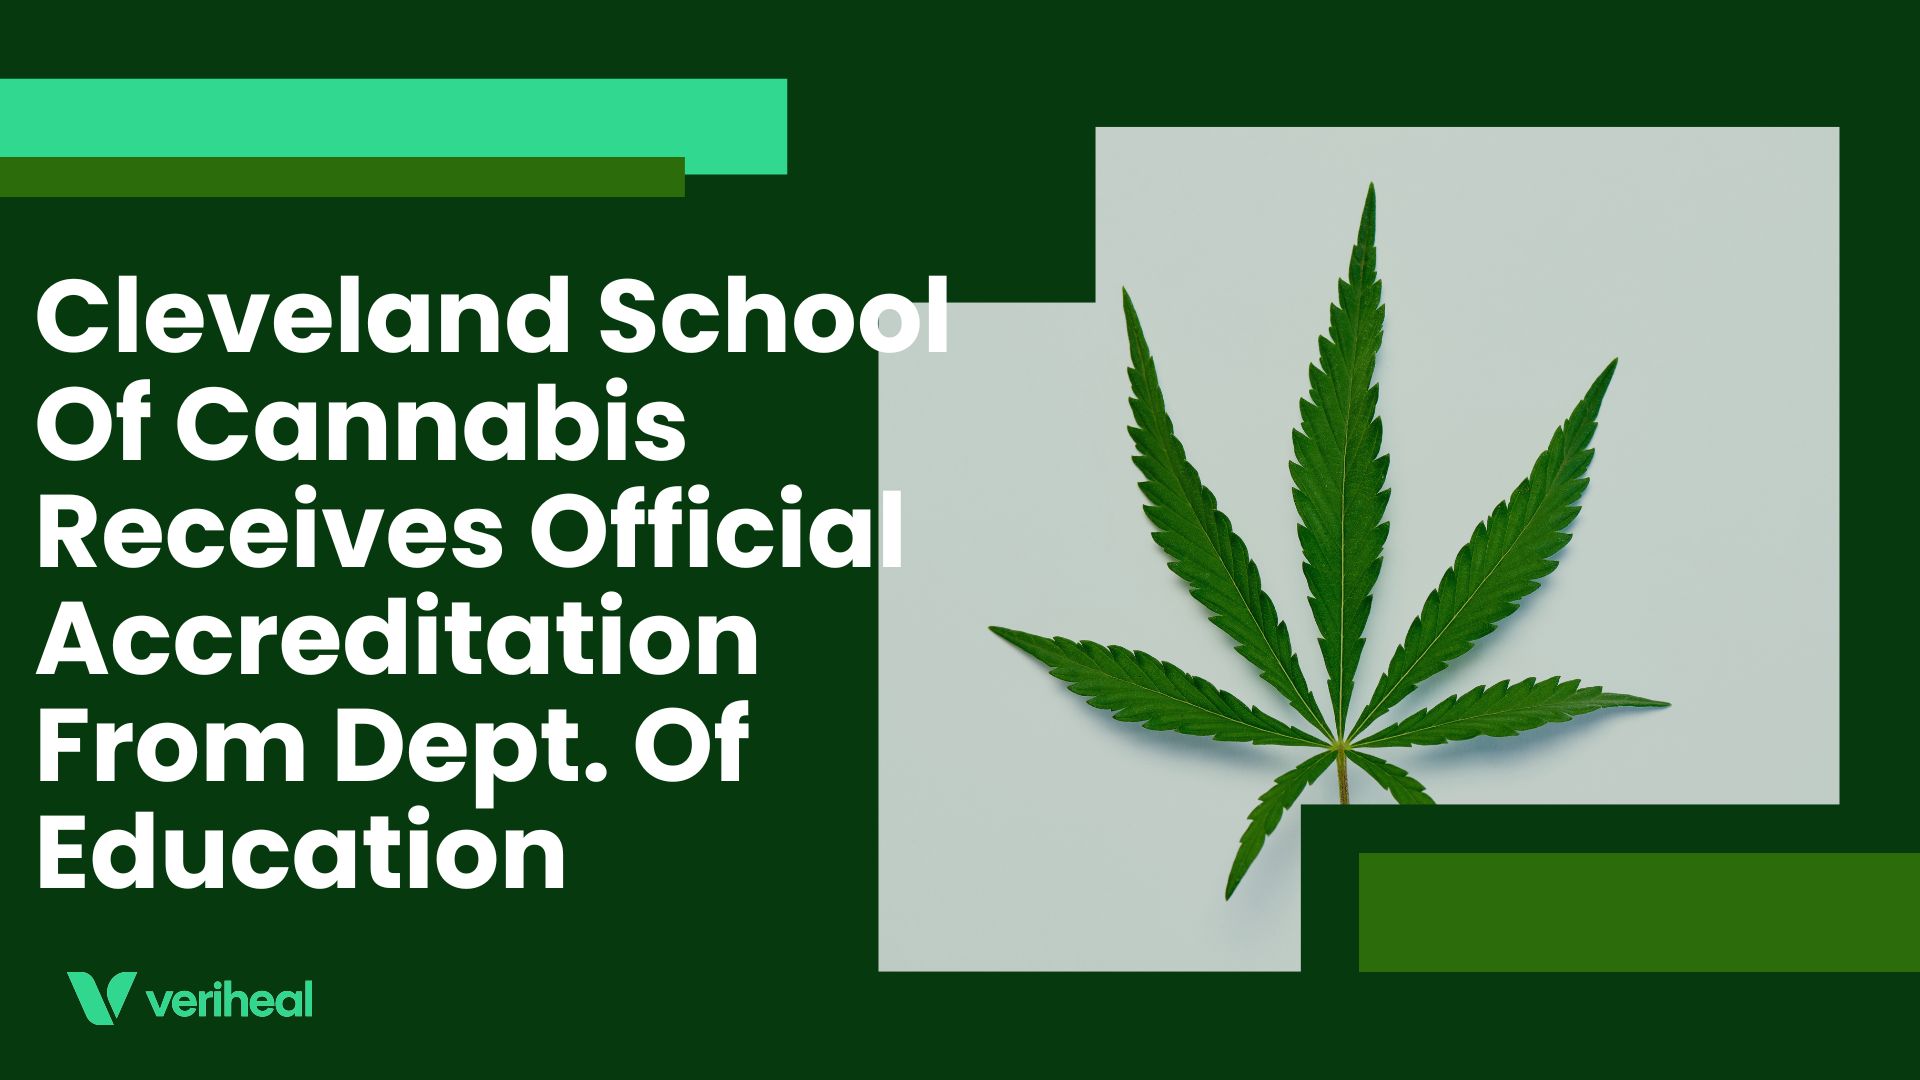 Cleveland School Of Cannabis Receives Official Accreditation From Dept. Of Education